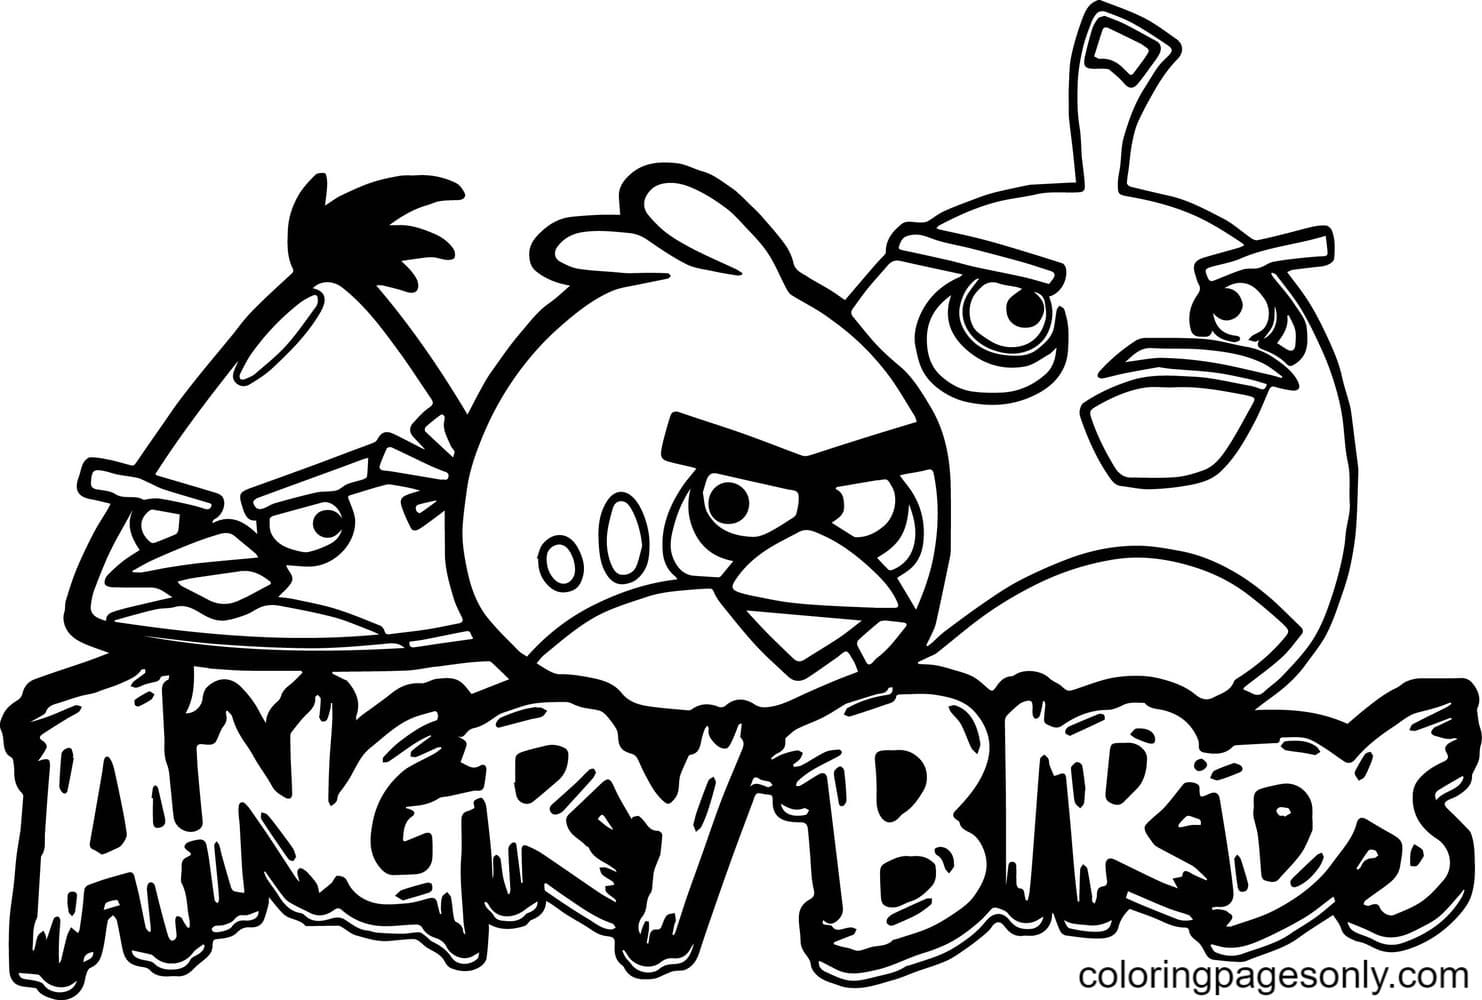 angry-birds-invitation-template-free